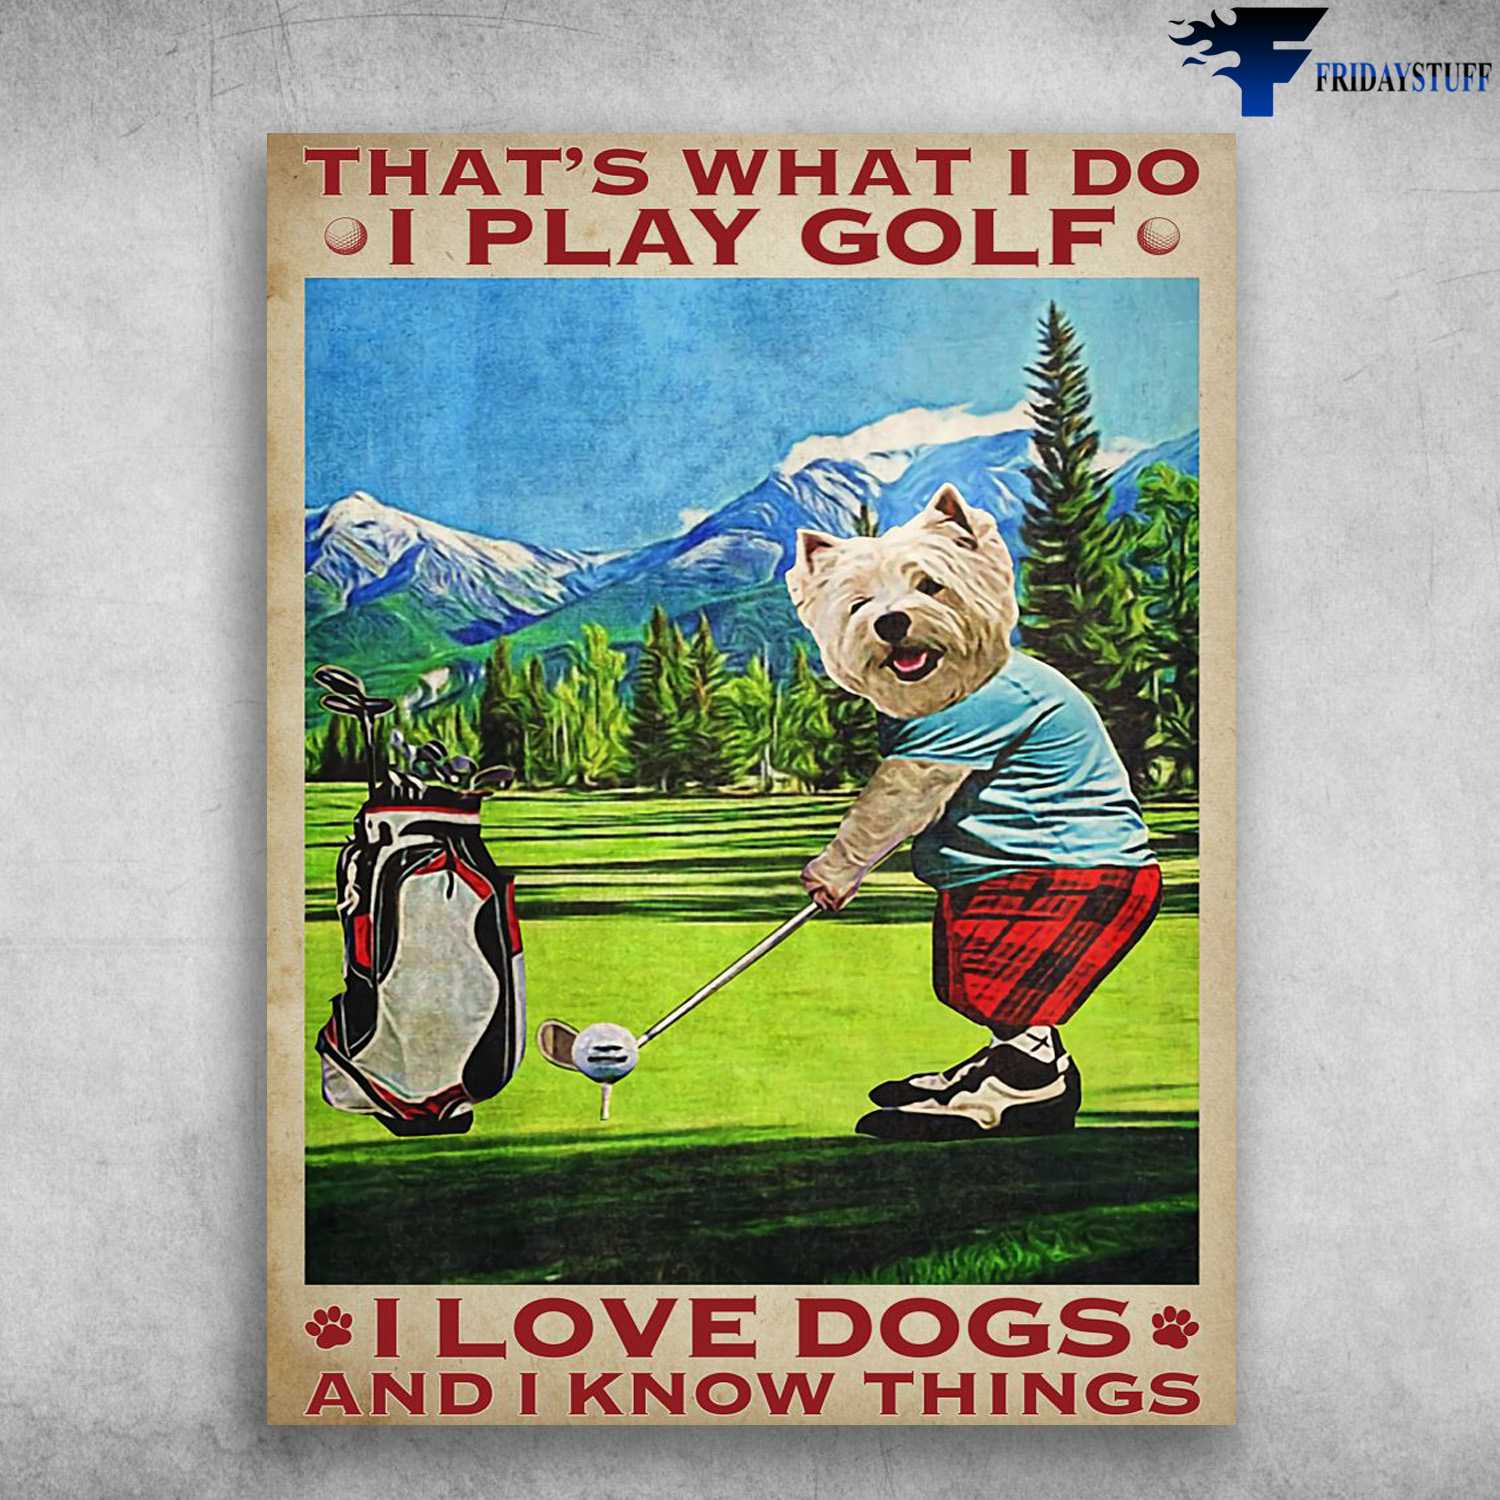 Dog Plays Golf, Dog Lvoer - That's What I Do, I Play Golf, I Love Dogs, And I Know Things